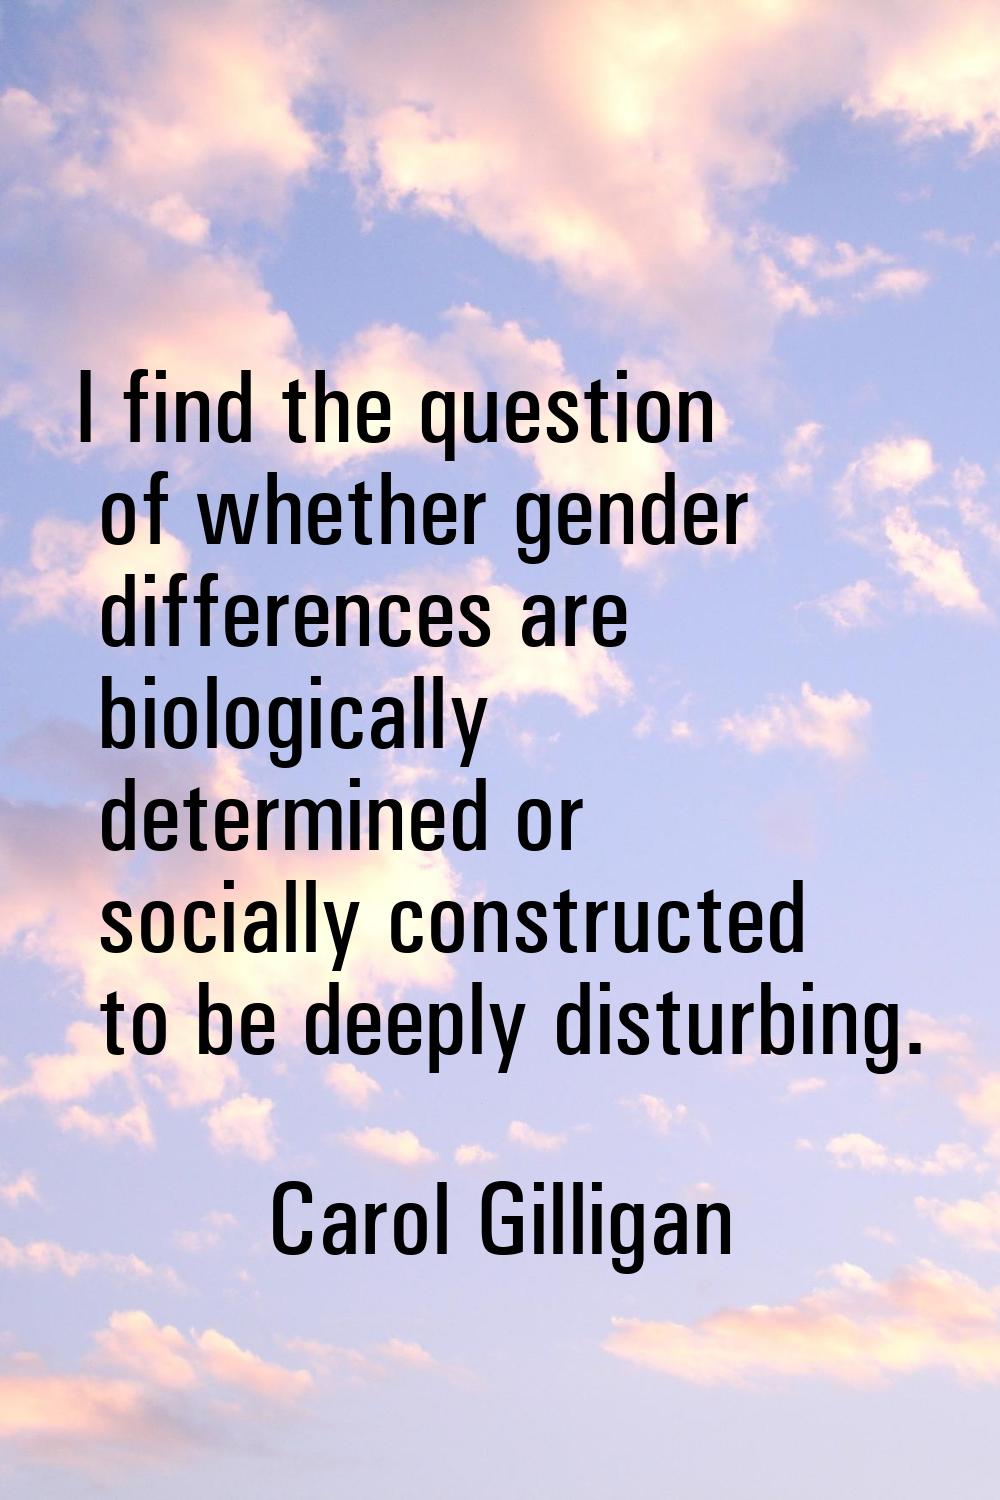 I find the question of whether gender differences are biologically determined or socially construct